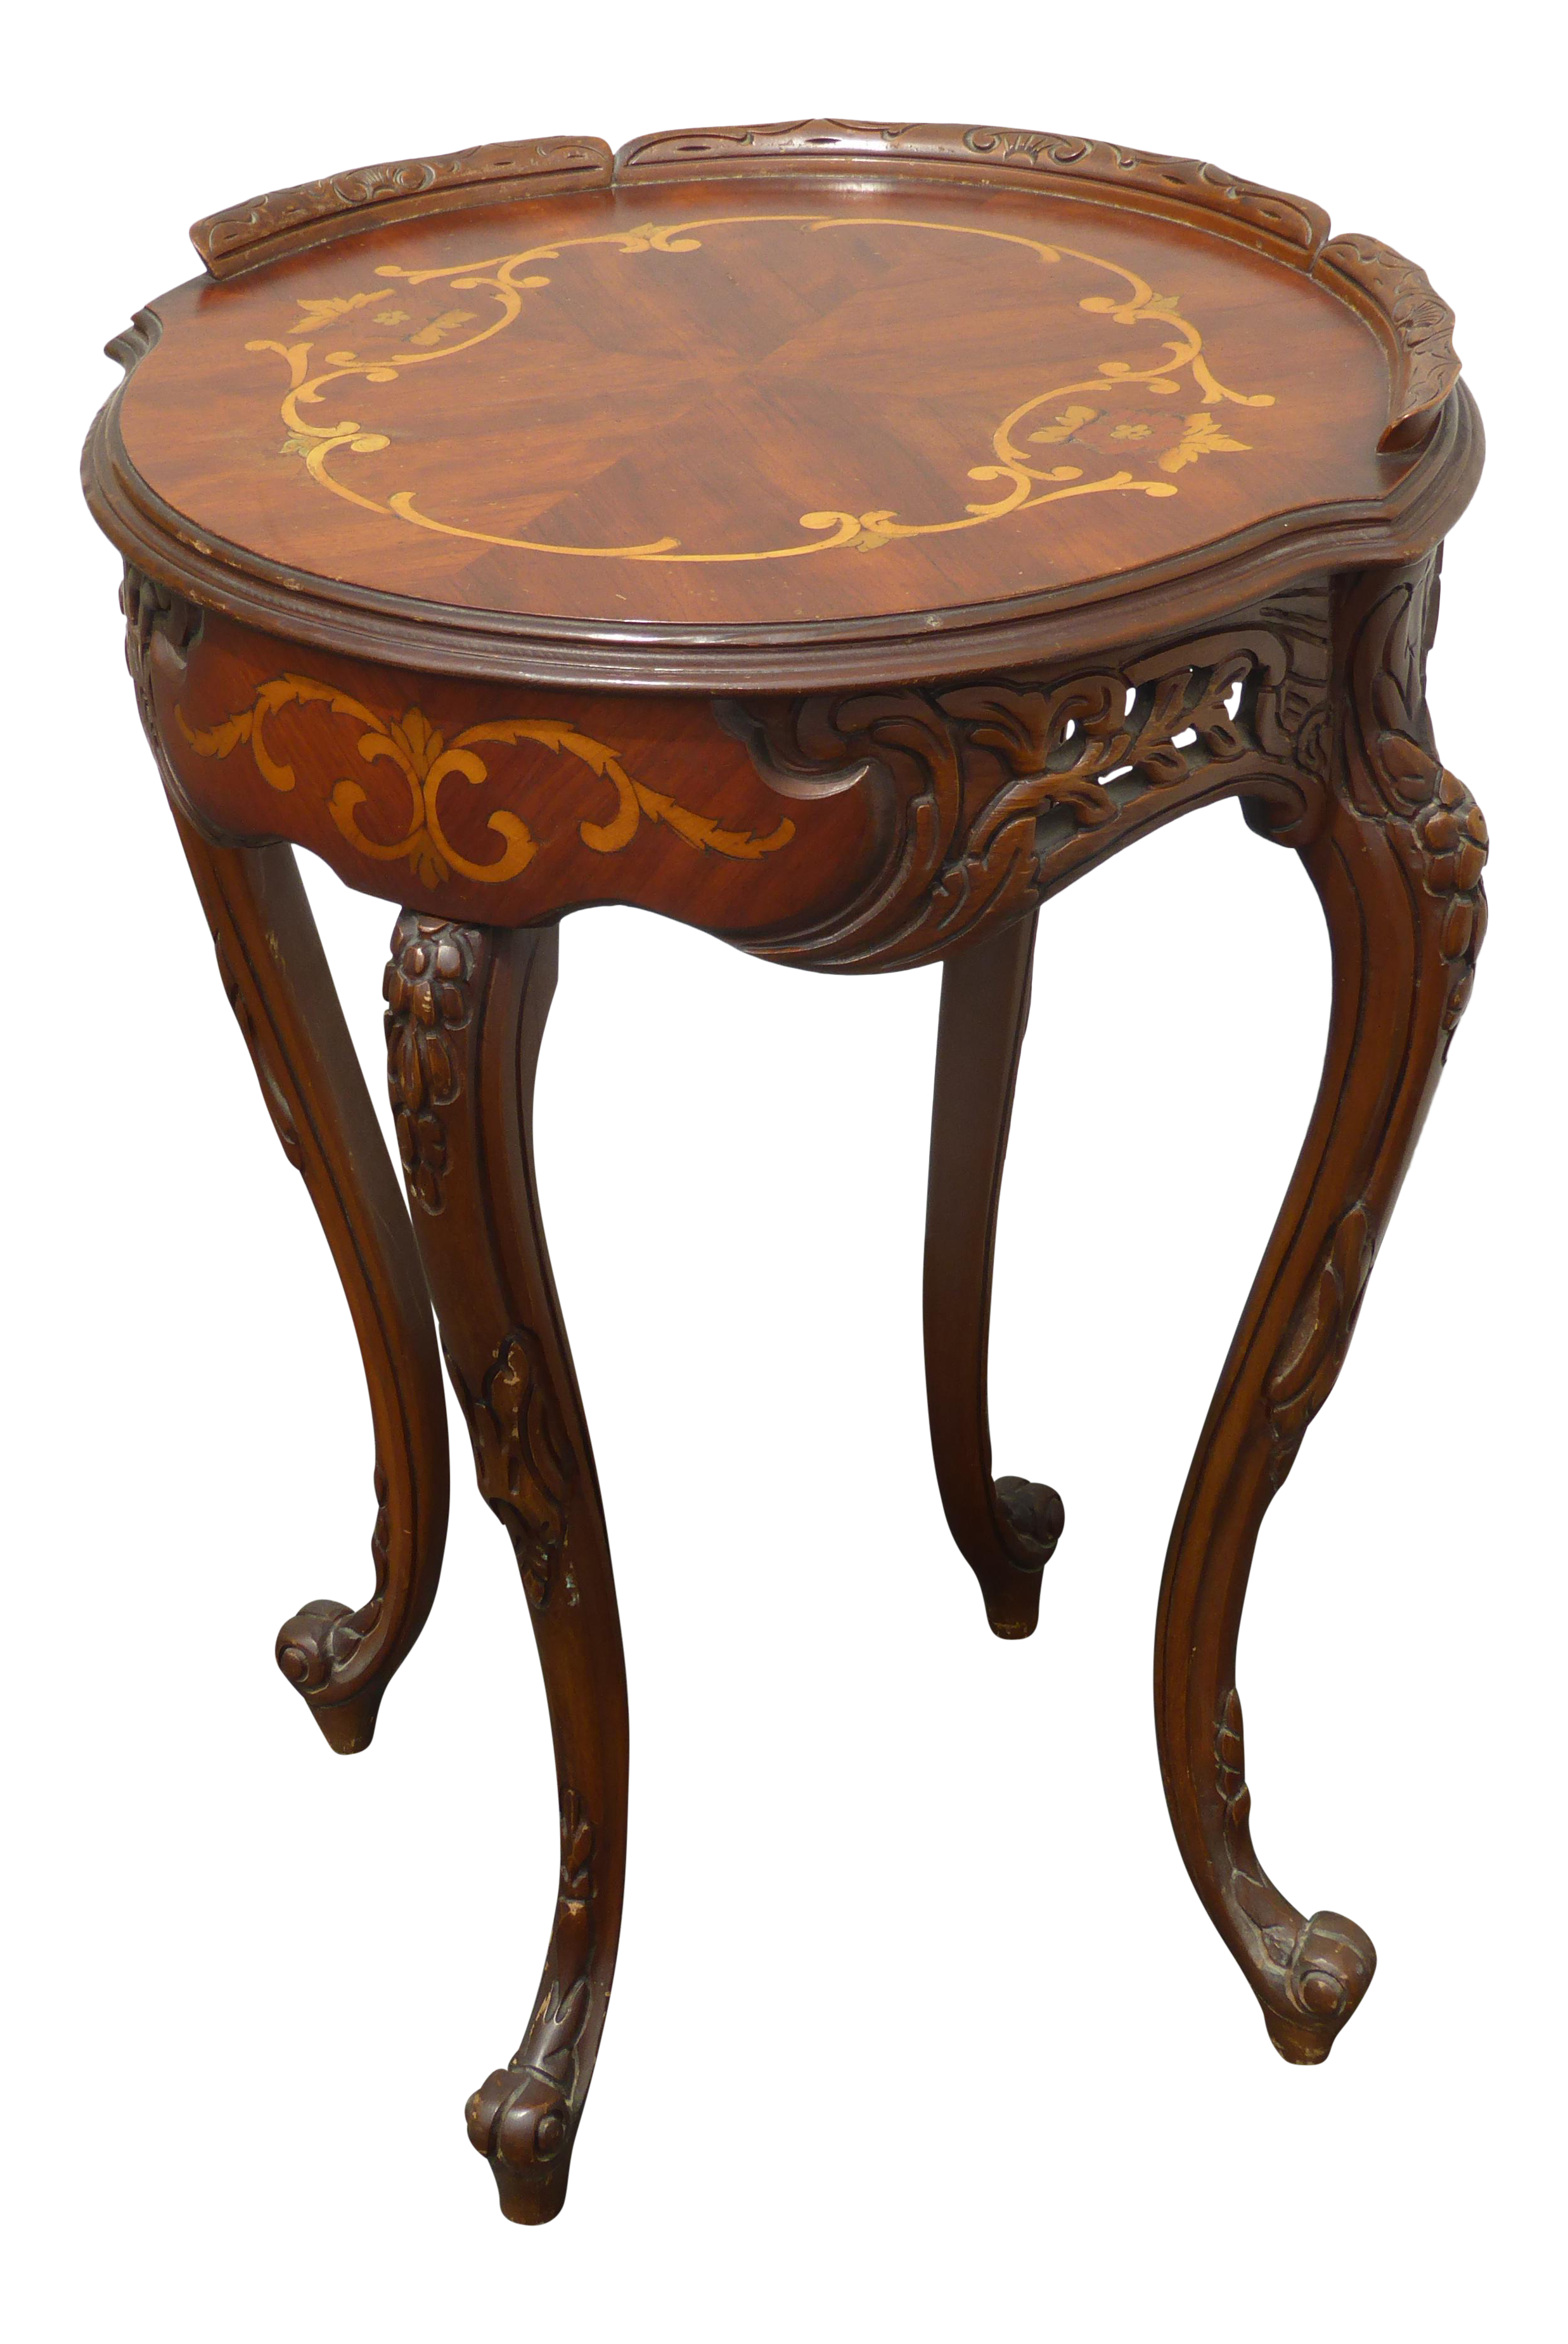 vintage french rococo carved inlay side end table chairish wood accent cordless lamps living room cabinets with glass doors console set butler specialty dale tiffany lamp shades